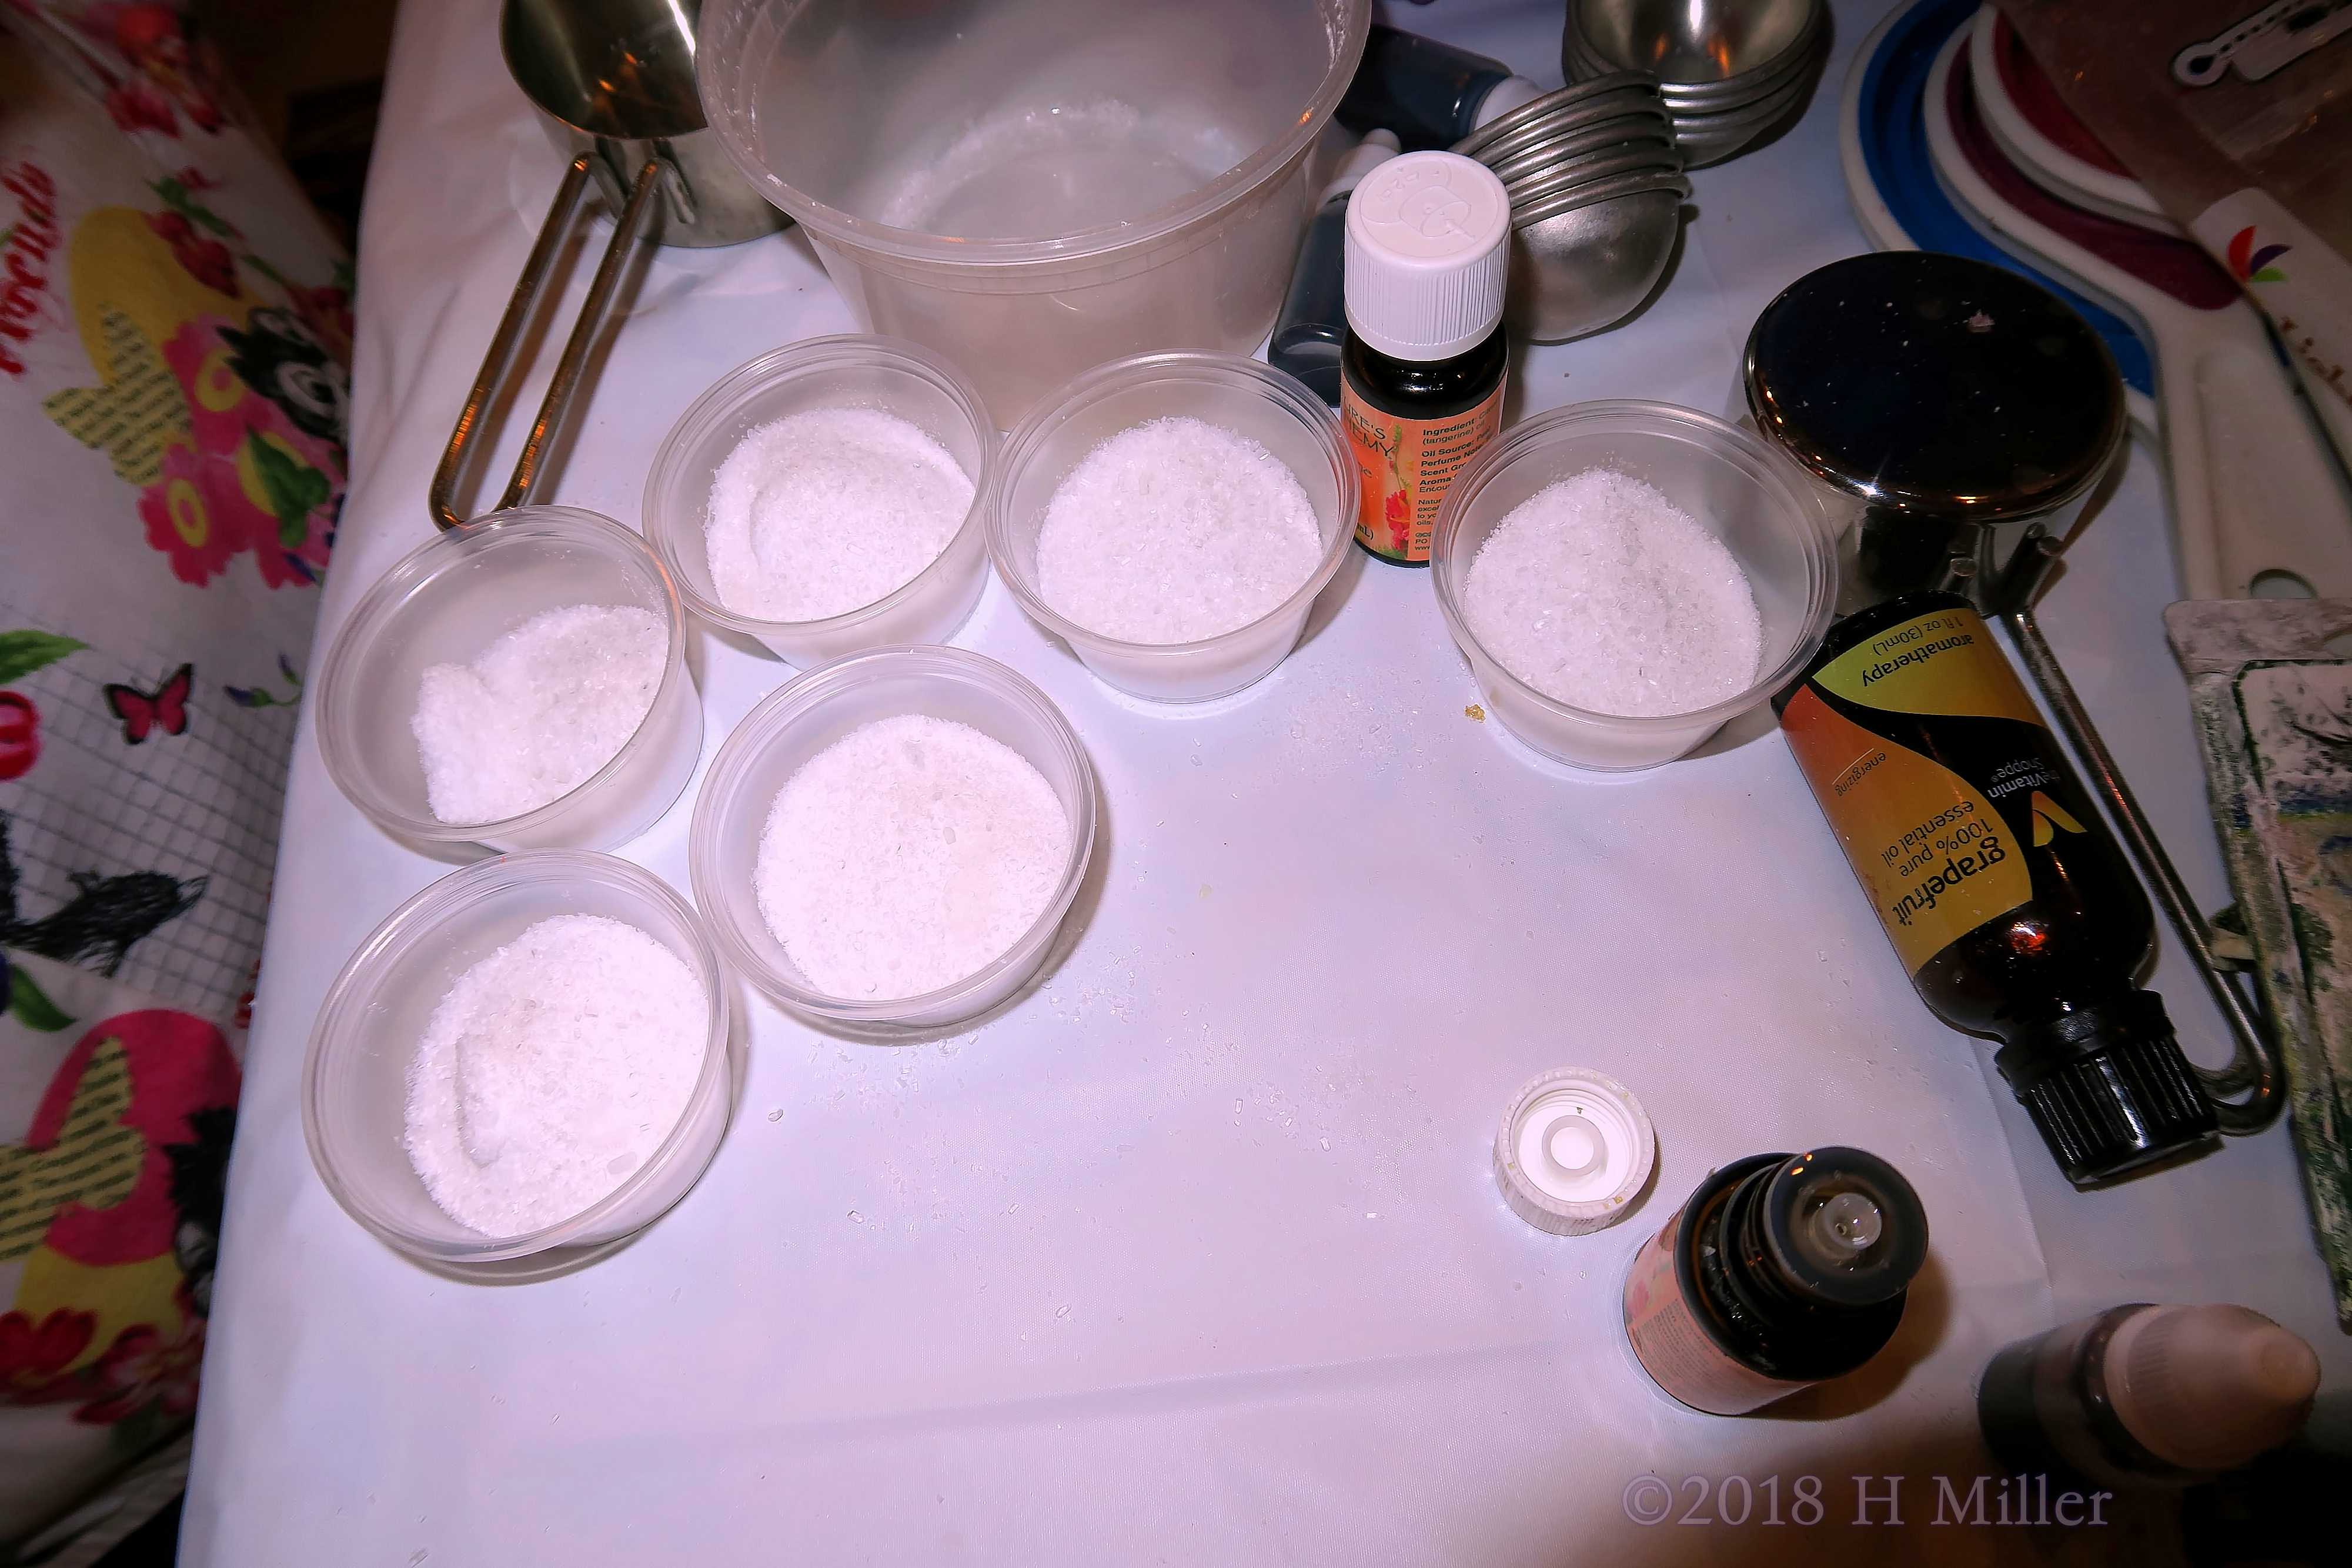 Lip Balm And Bath Salts Kids Craft Ingredients At The Girls Spa Party! 